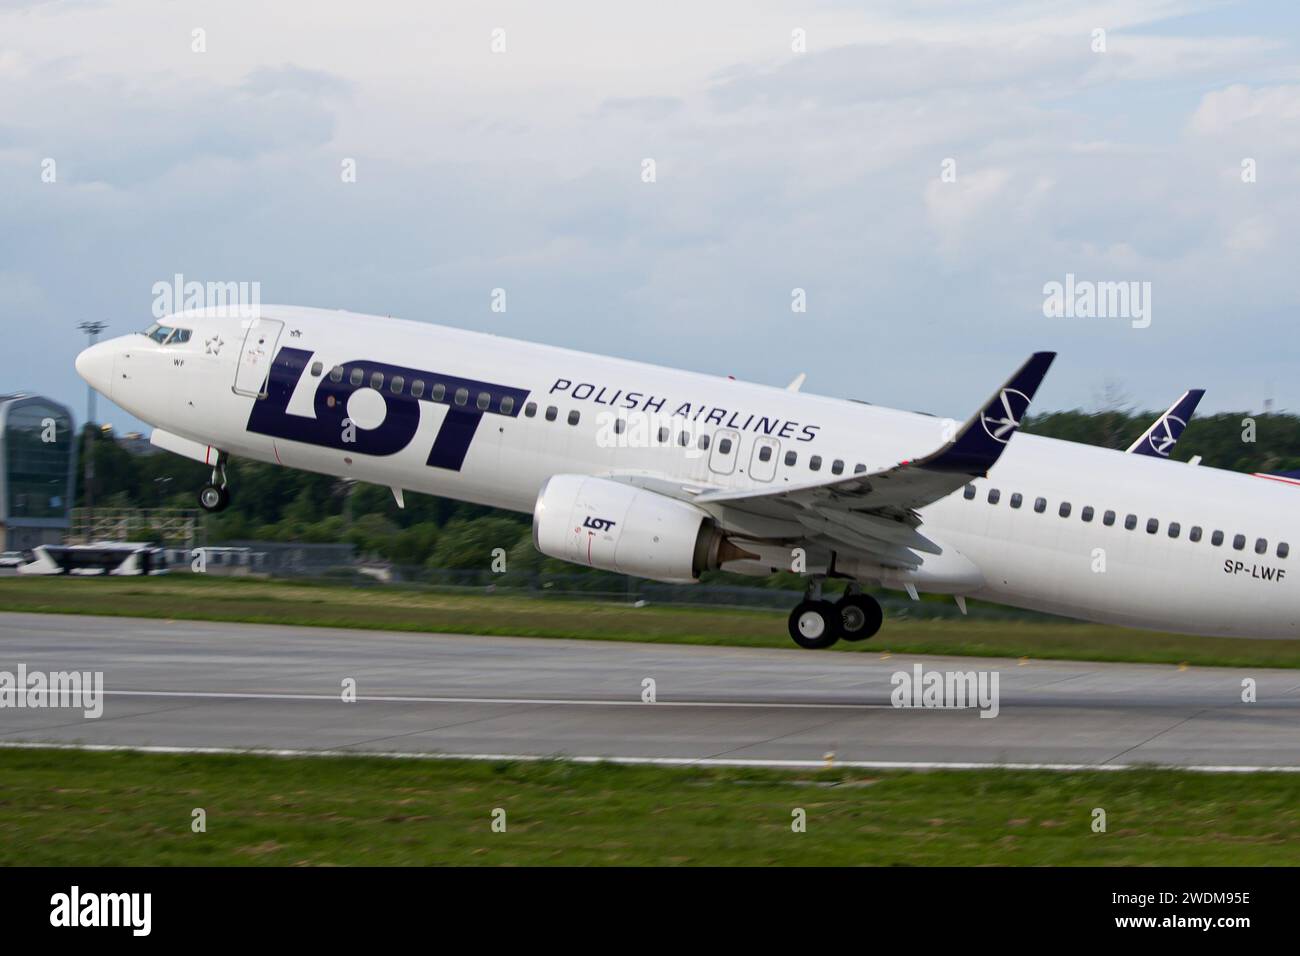 LOT Polish Airlines Boeing 737-800 close-up while taking off from Lviv Airport Stock Photo